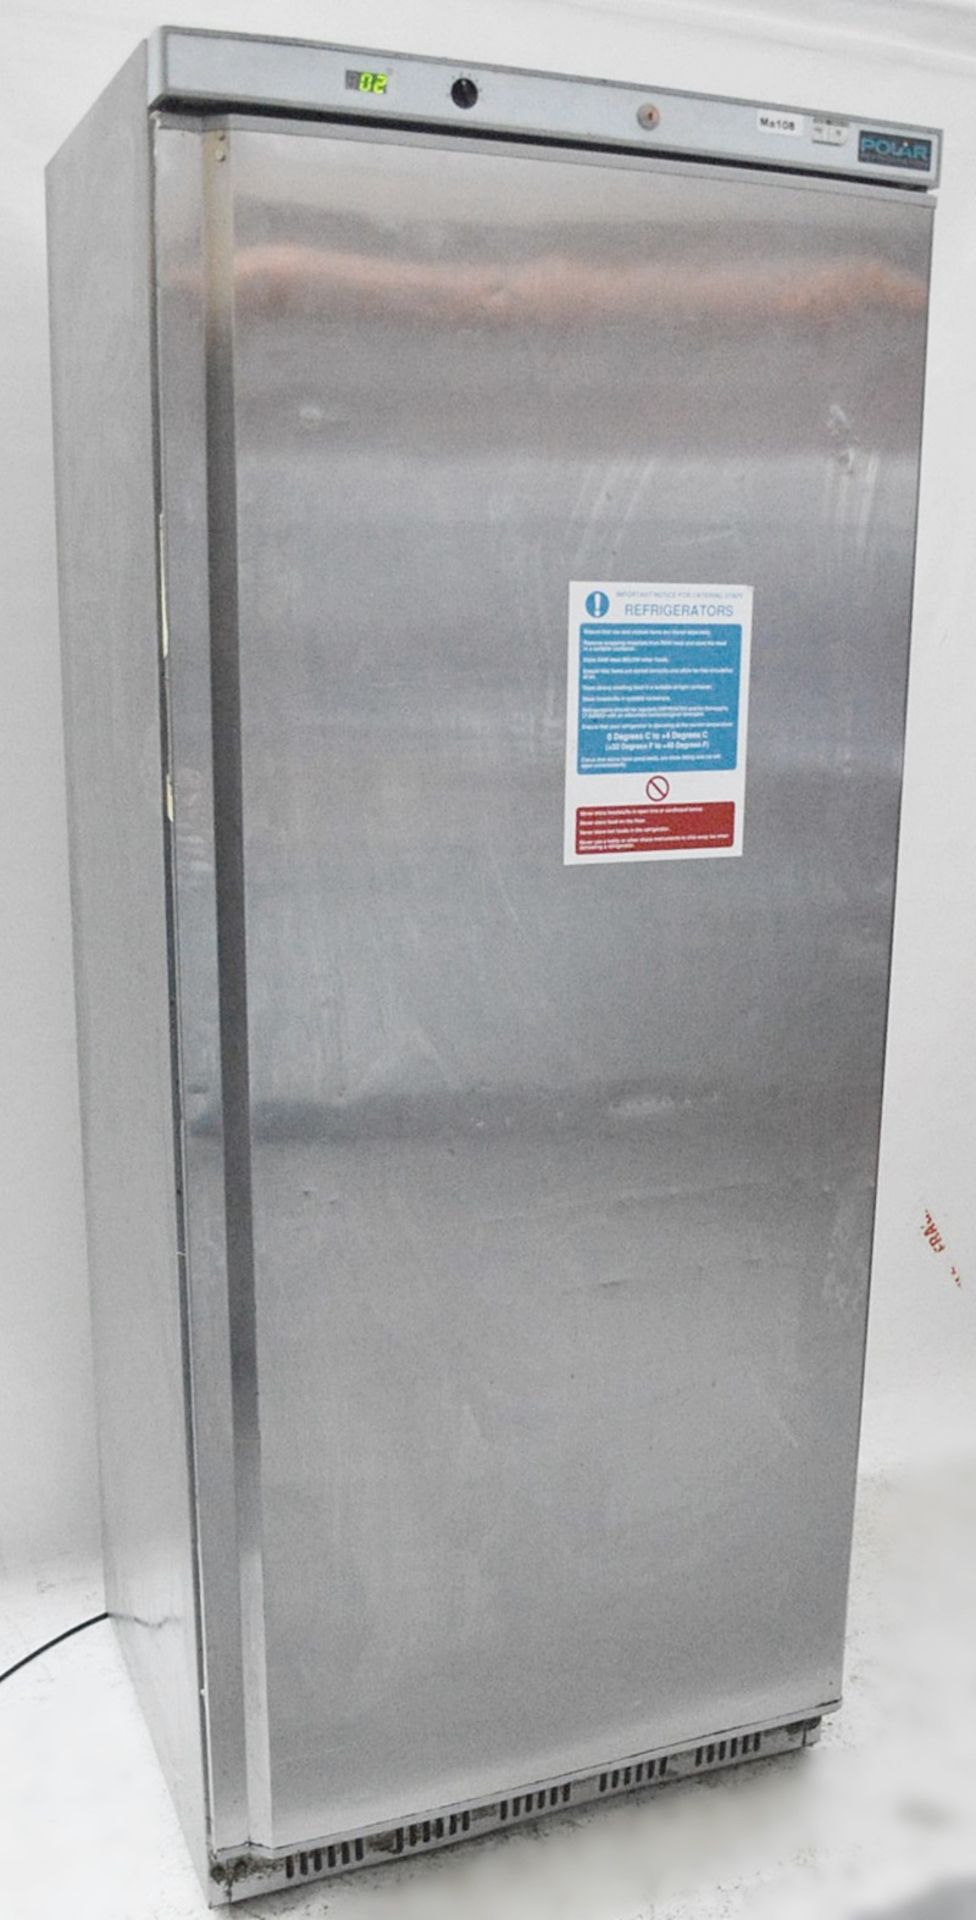 1 x Polar CD084 600 Ltr Single Door Upright Fridge - Recently Removed From A Commercial Kitchen